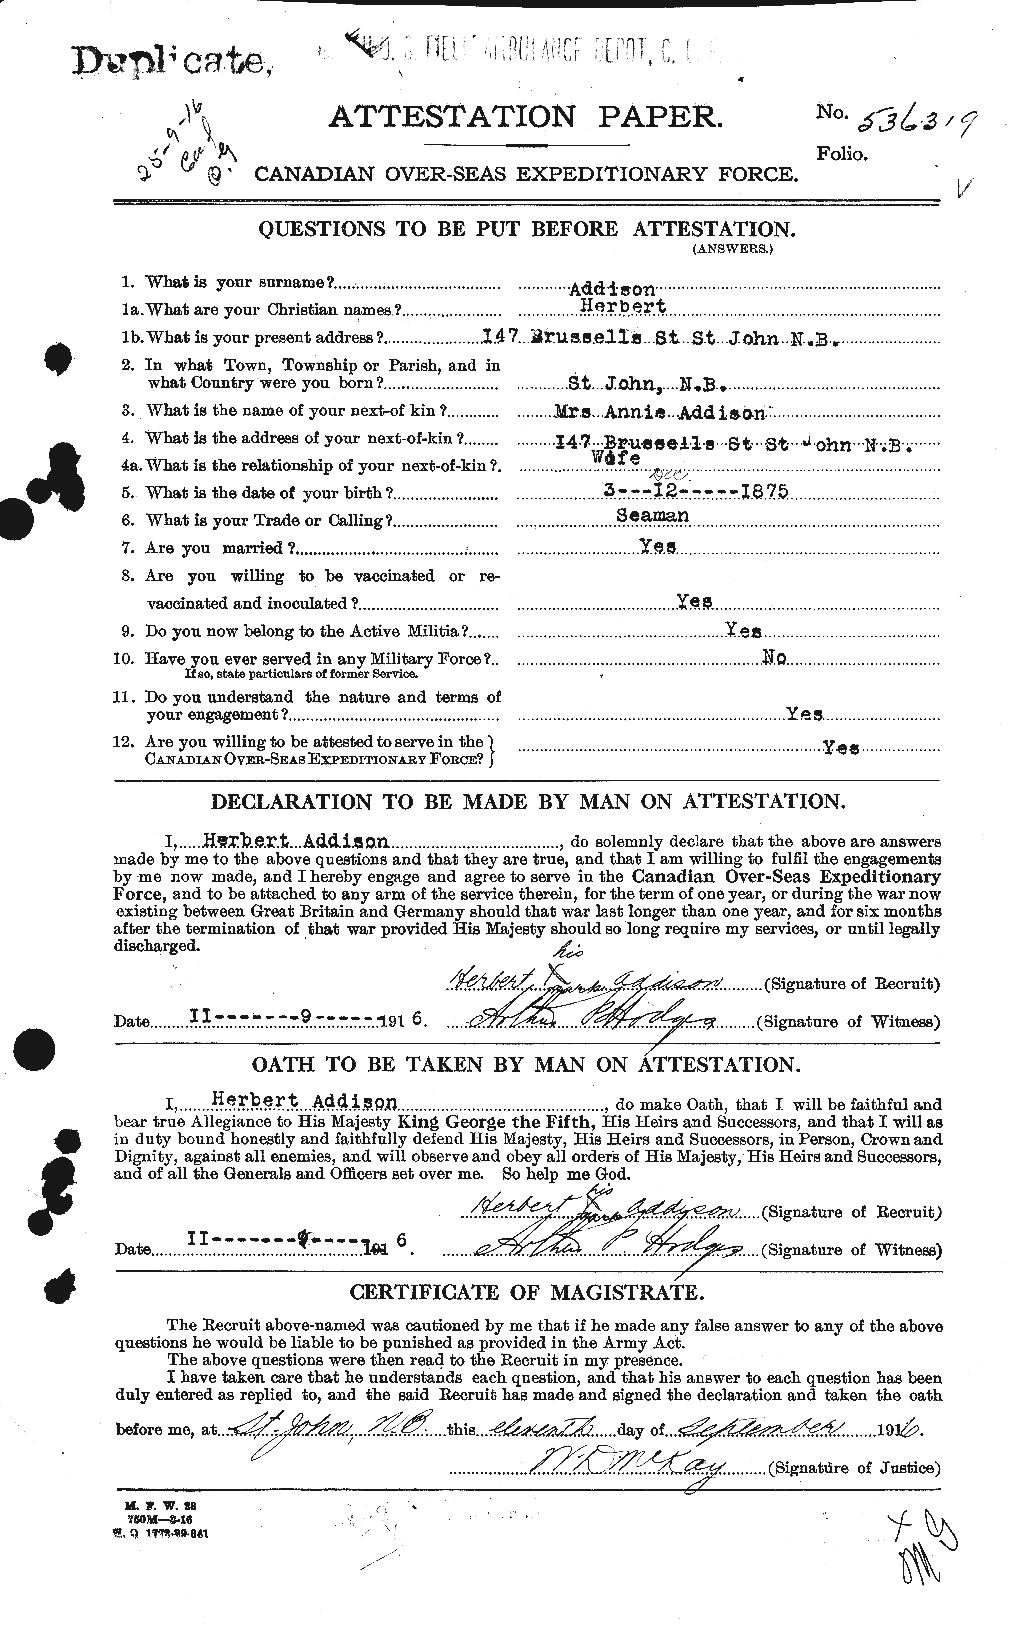 Personnel Records of the First World War - CEF 202500a